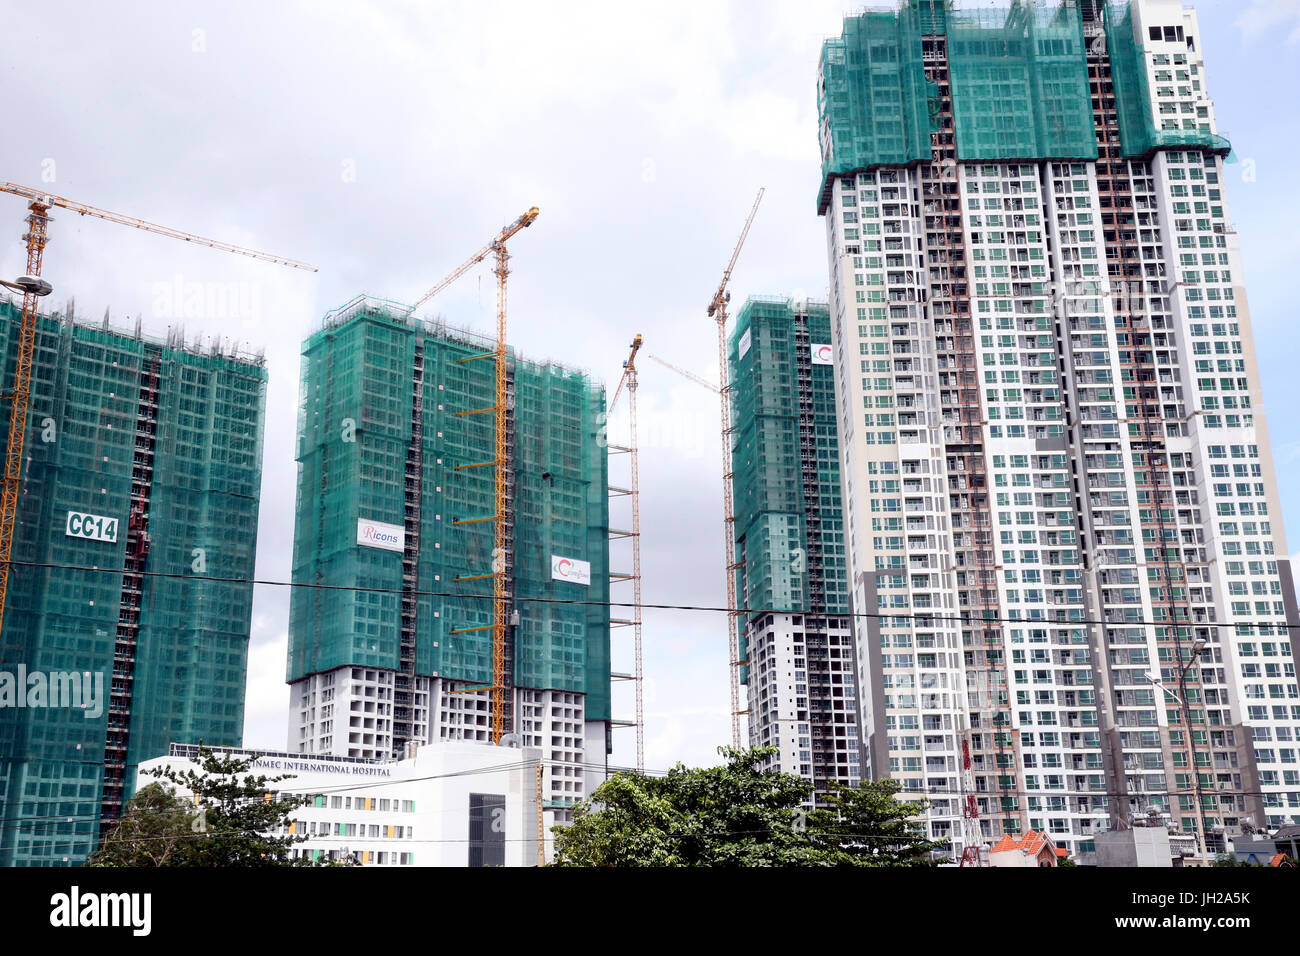 The Construction site in Saigon South, a mixed residential and commercial urban development covering 3,300 hectares.  Ho Chi Minh City. Vietnam. Stock Photo